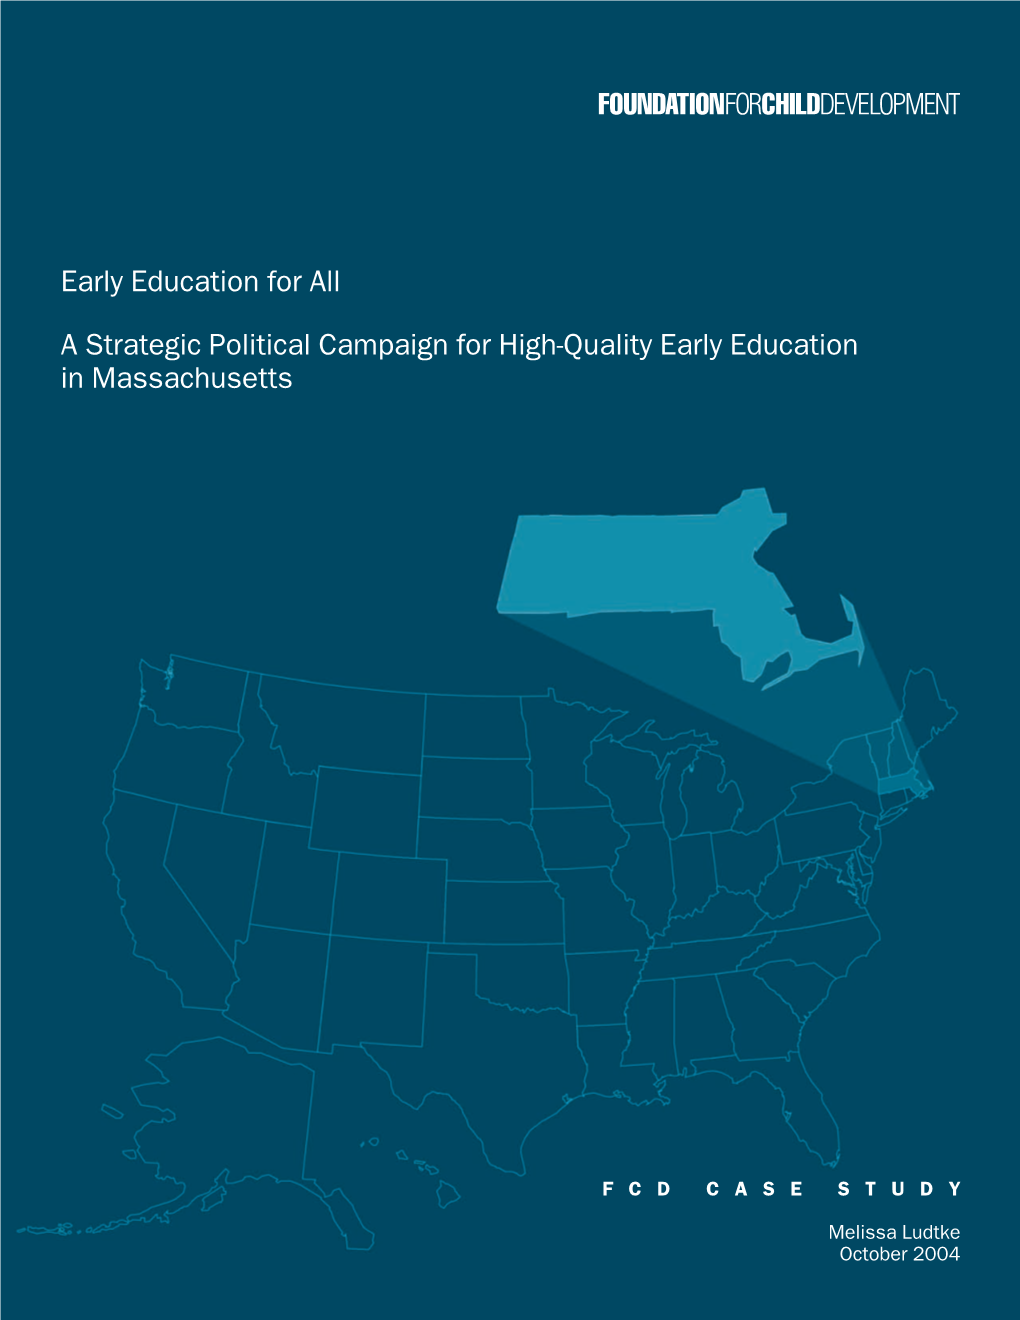 Early Education for All a Strategic Political Campaign for High-Quality Early Education in Massachusetts